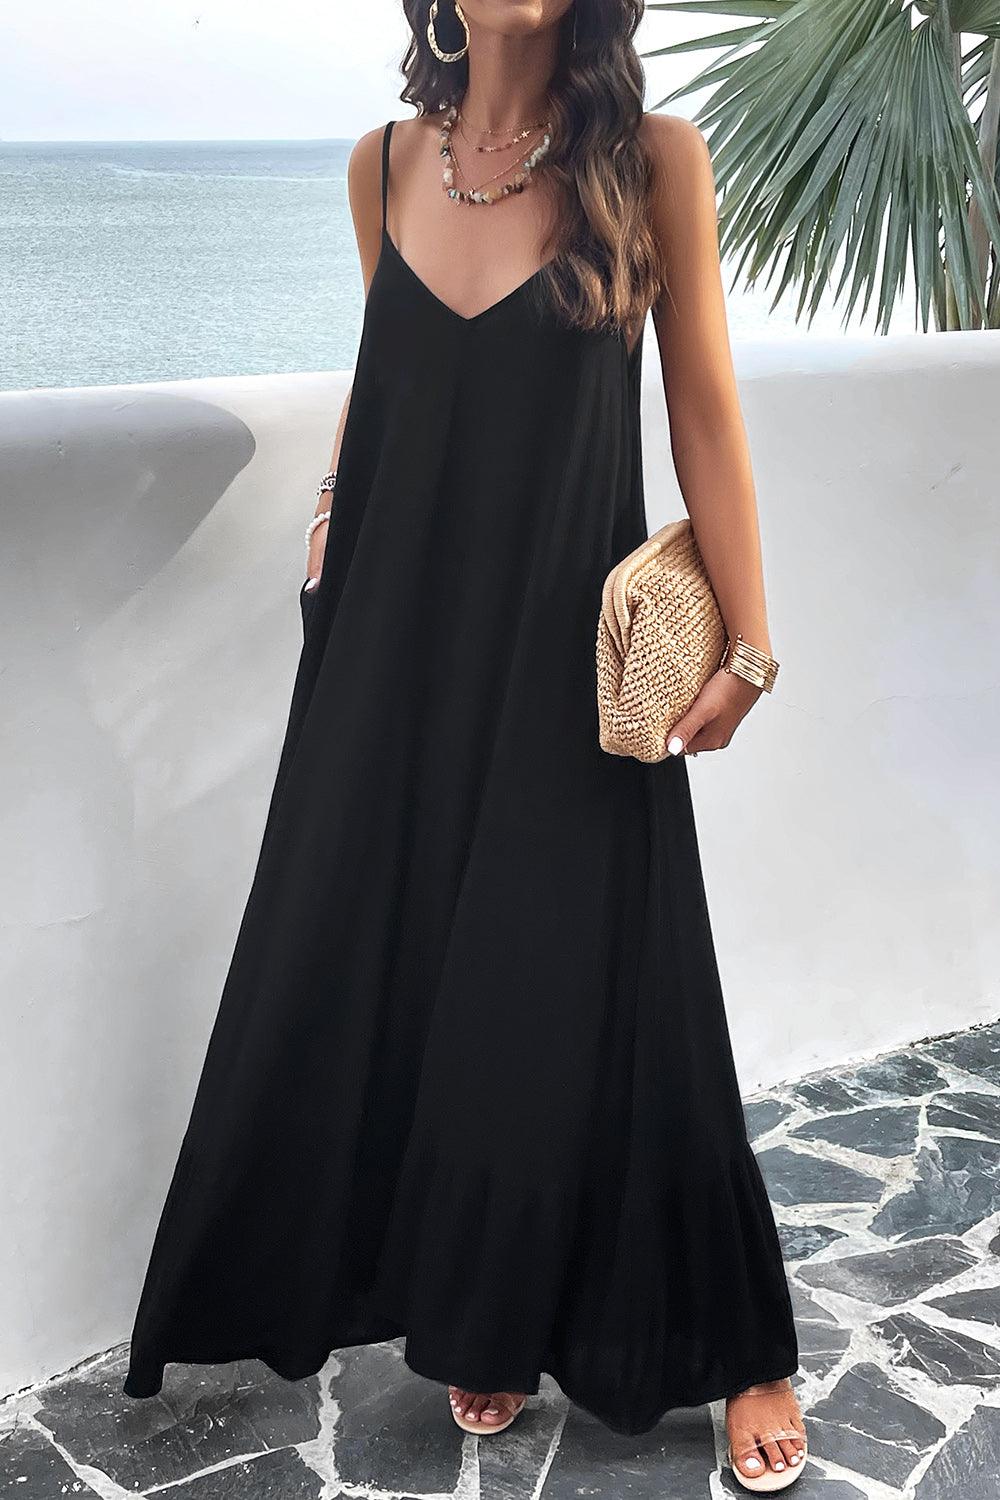 a woman in a black dress standing by the ocean